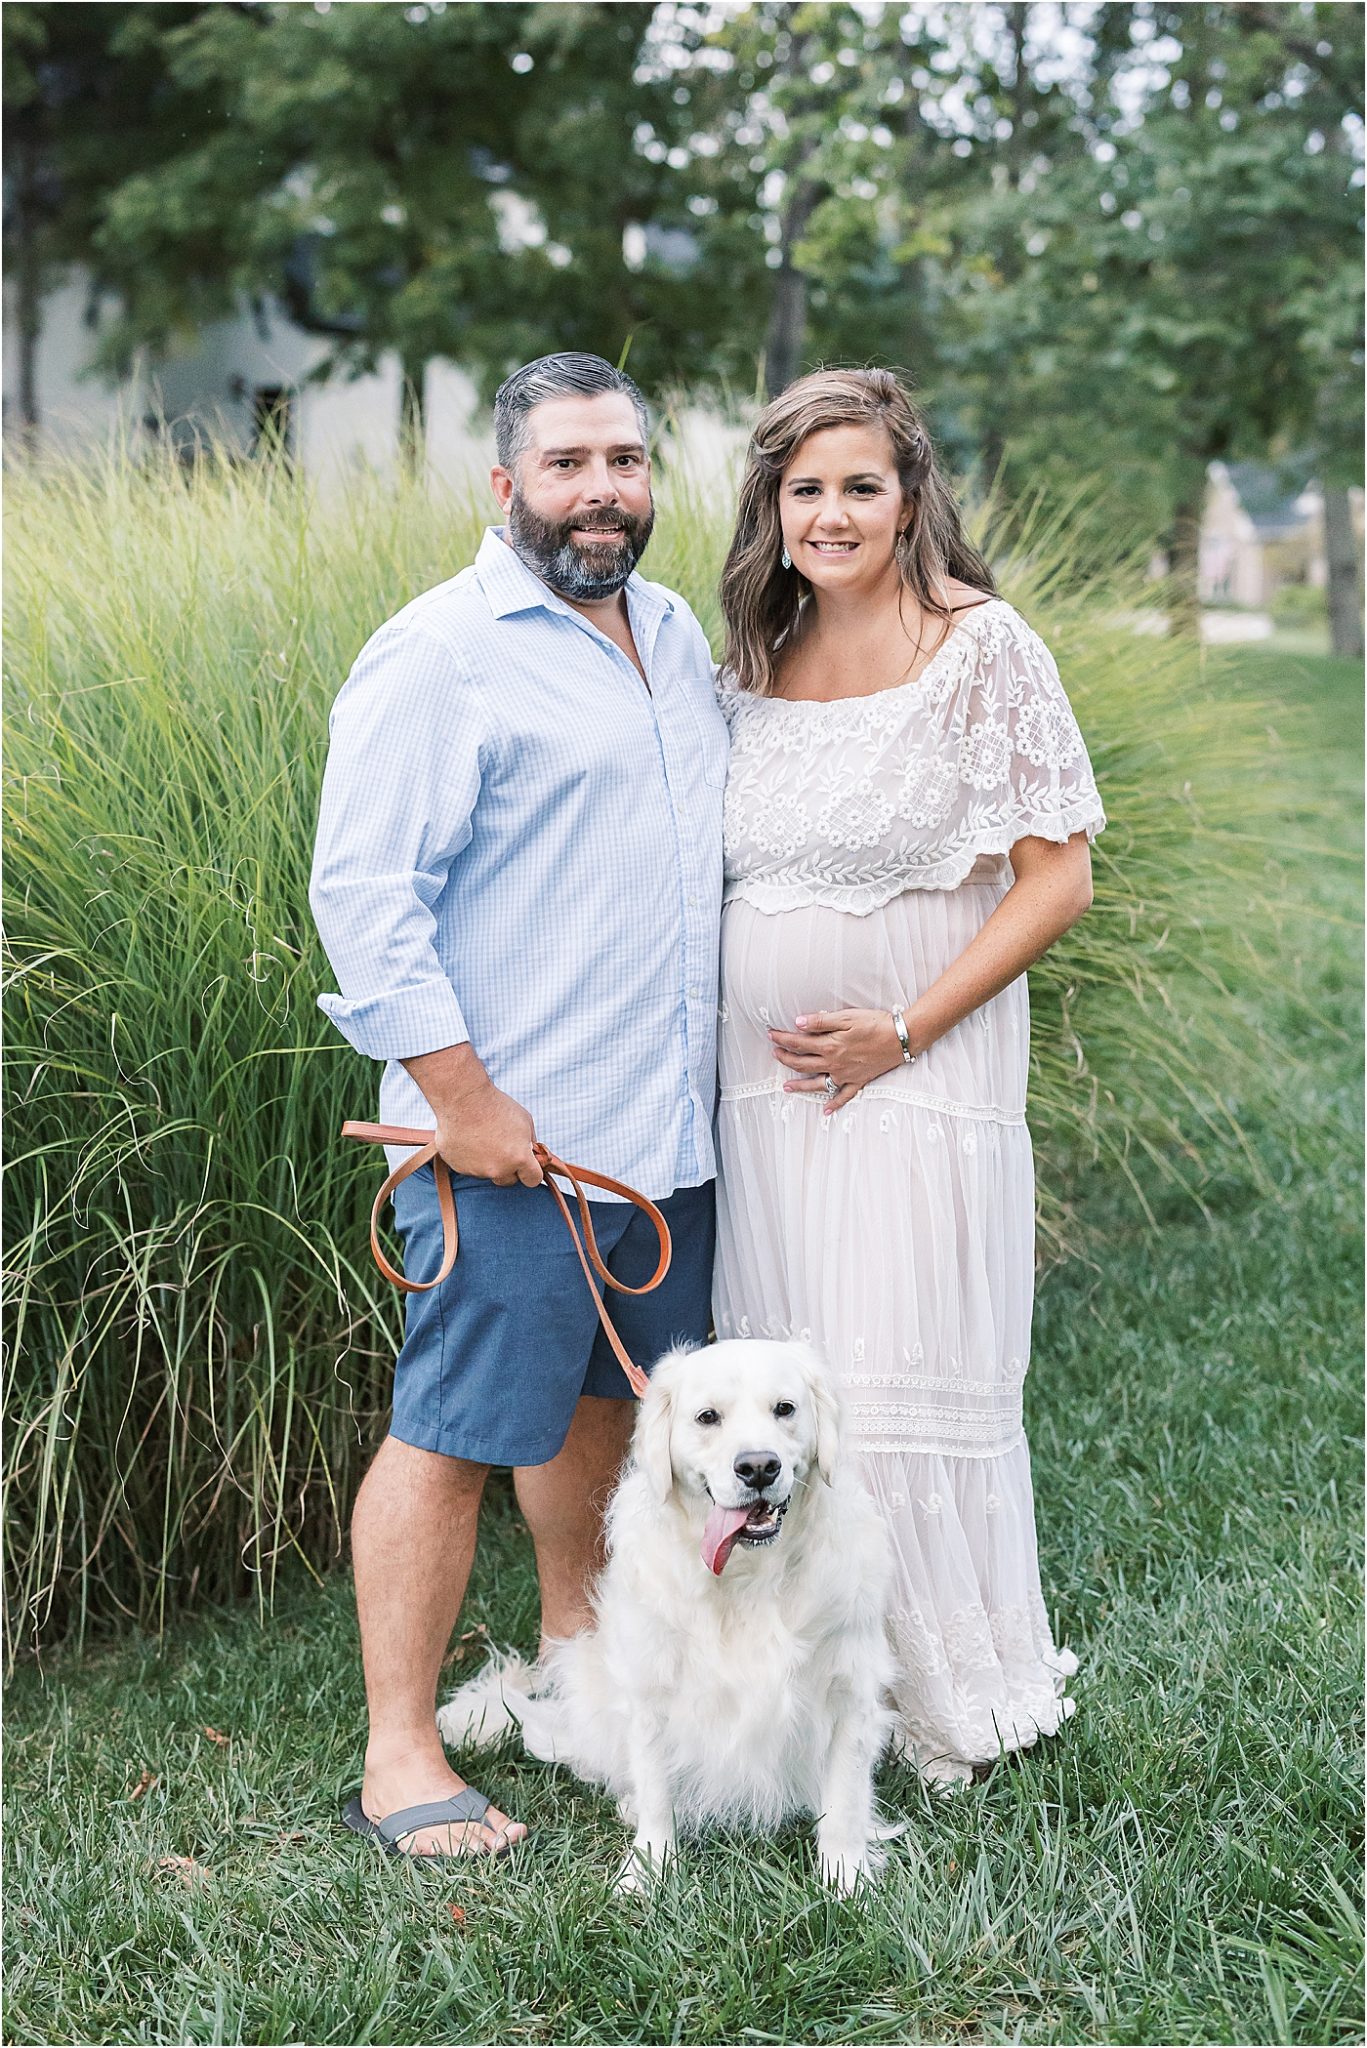 Maternity photo of mom, dad, and dog.